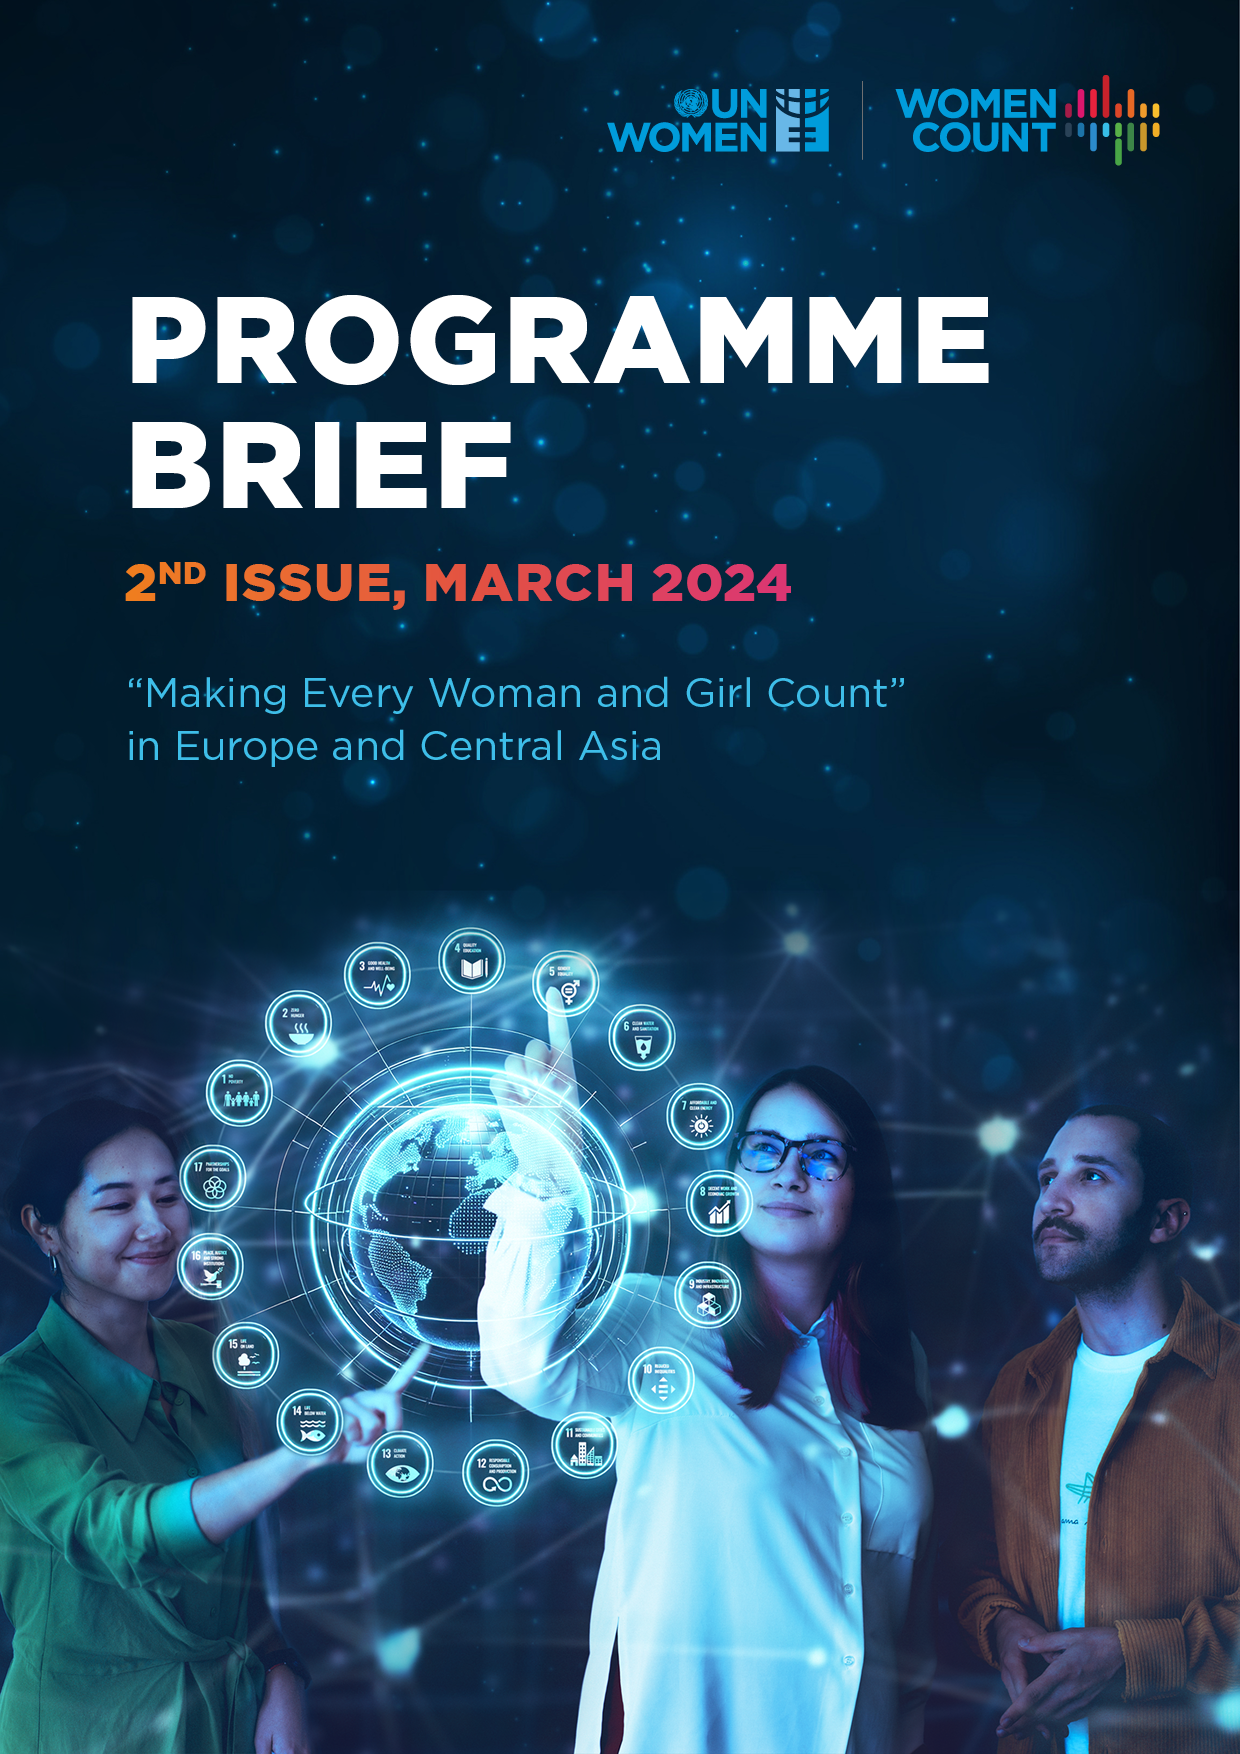 Women Count Europe and Central Asia programme brief